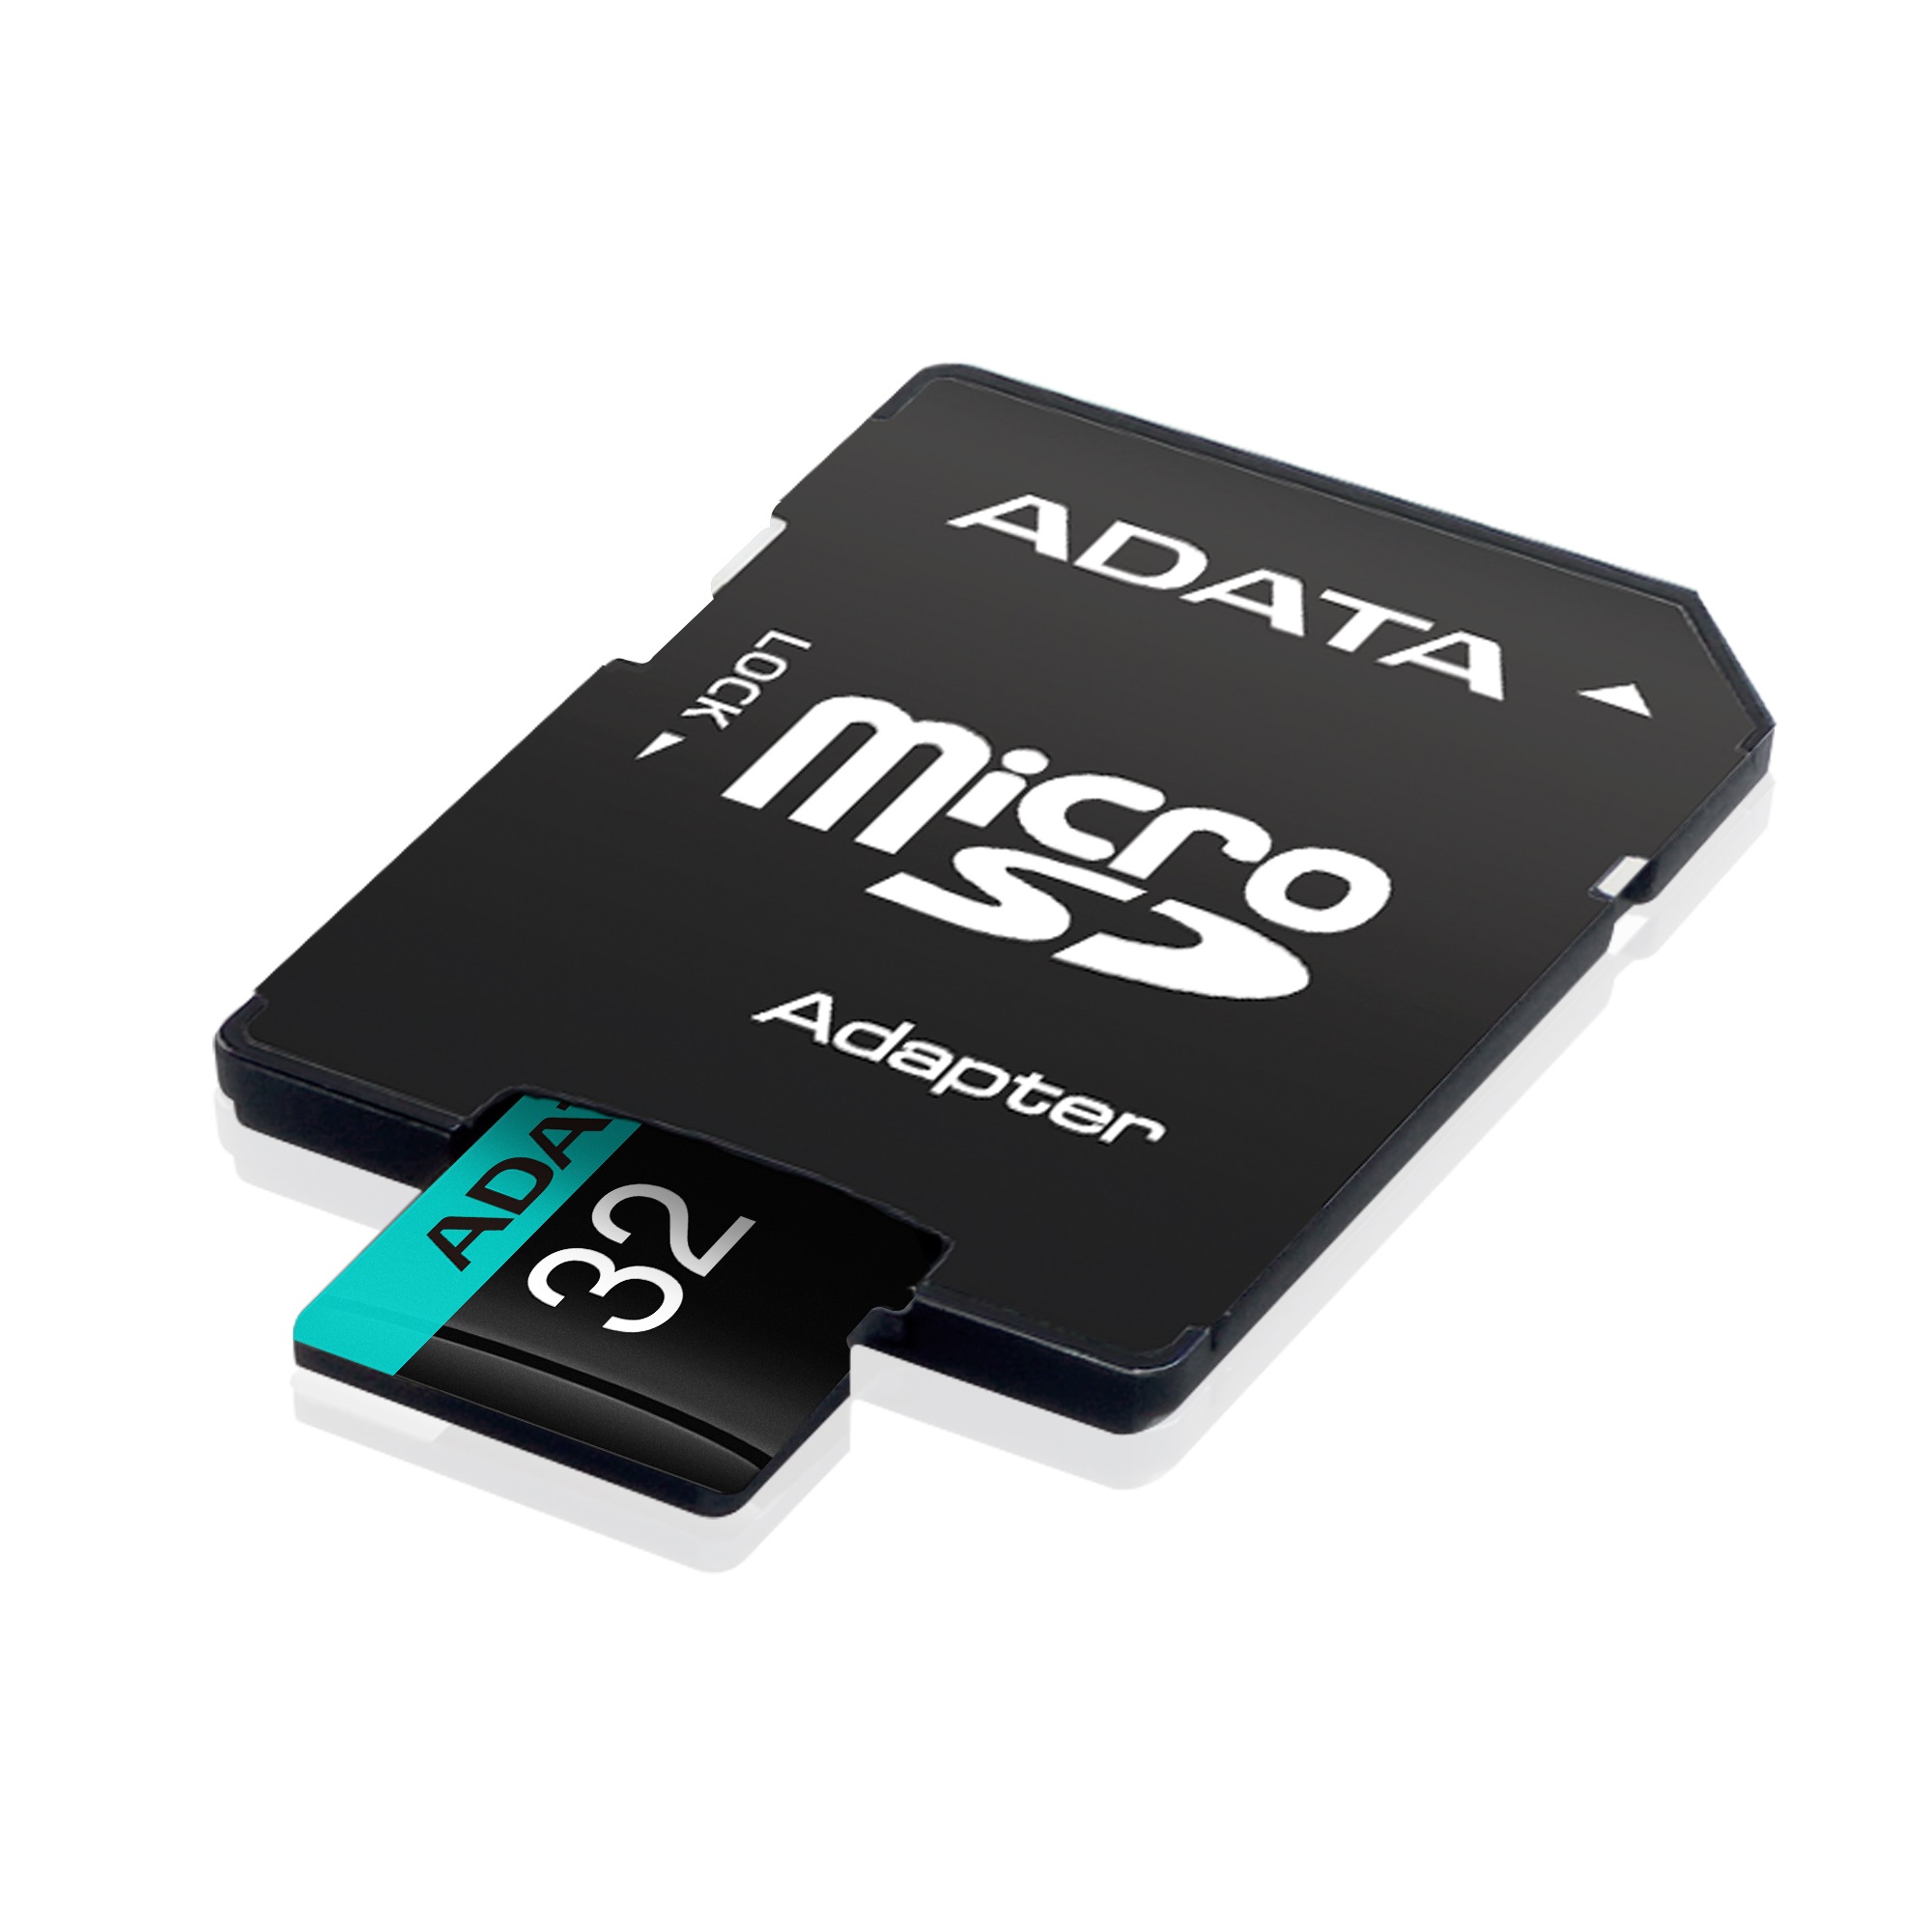 32GB AData Premier Pro microSDHC CL10 UHS-I U3 V30 A2 Memory Card with SD Adapter - image 3 of 4